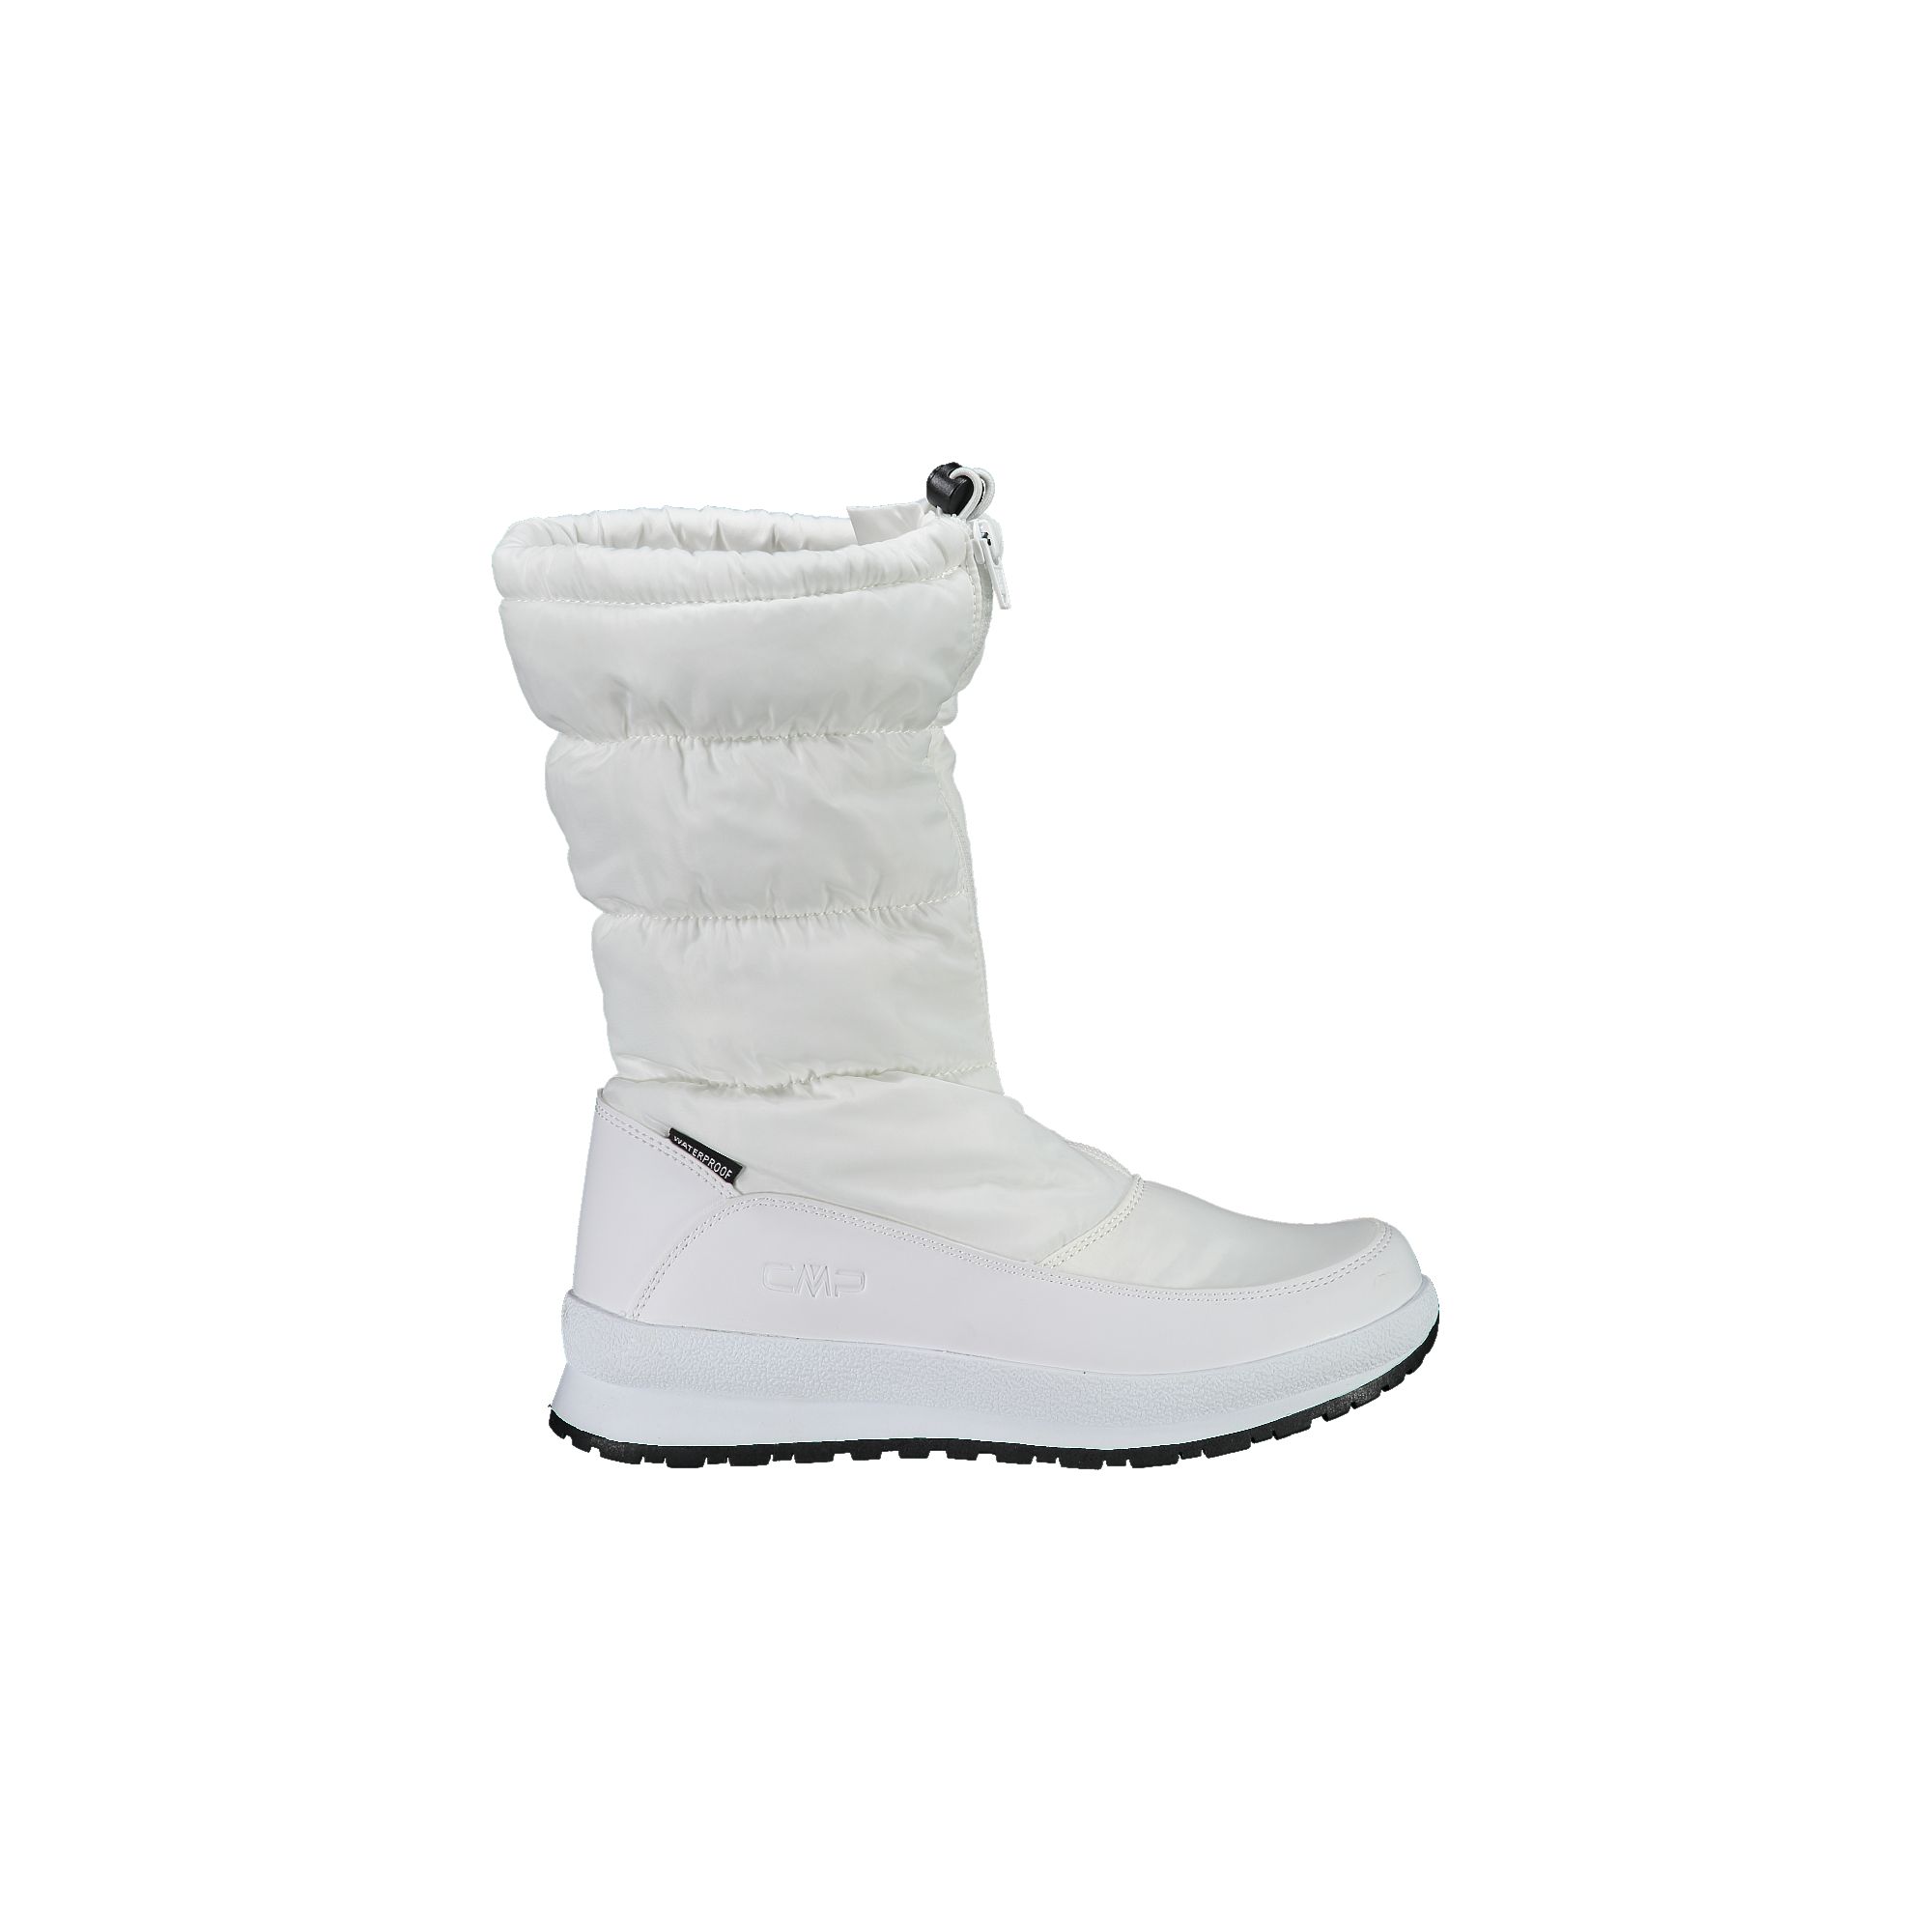 HOTY WMN SNOW BOOT Boot